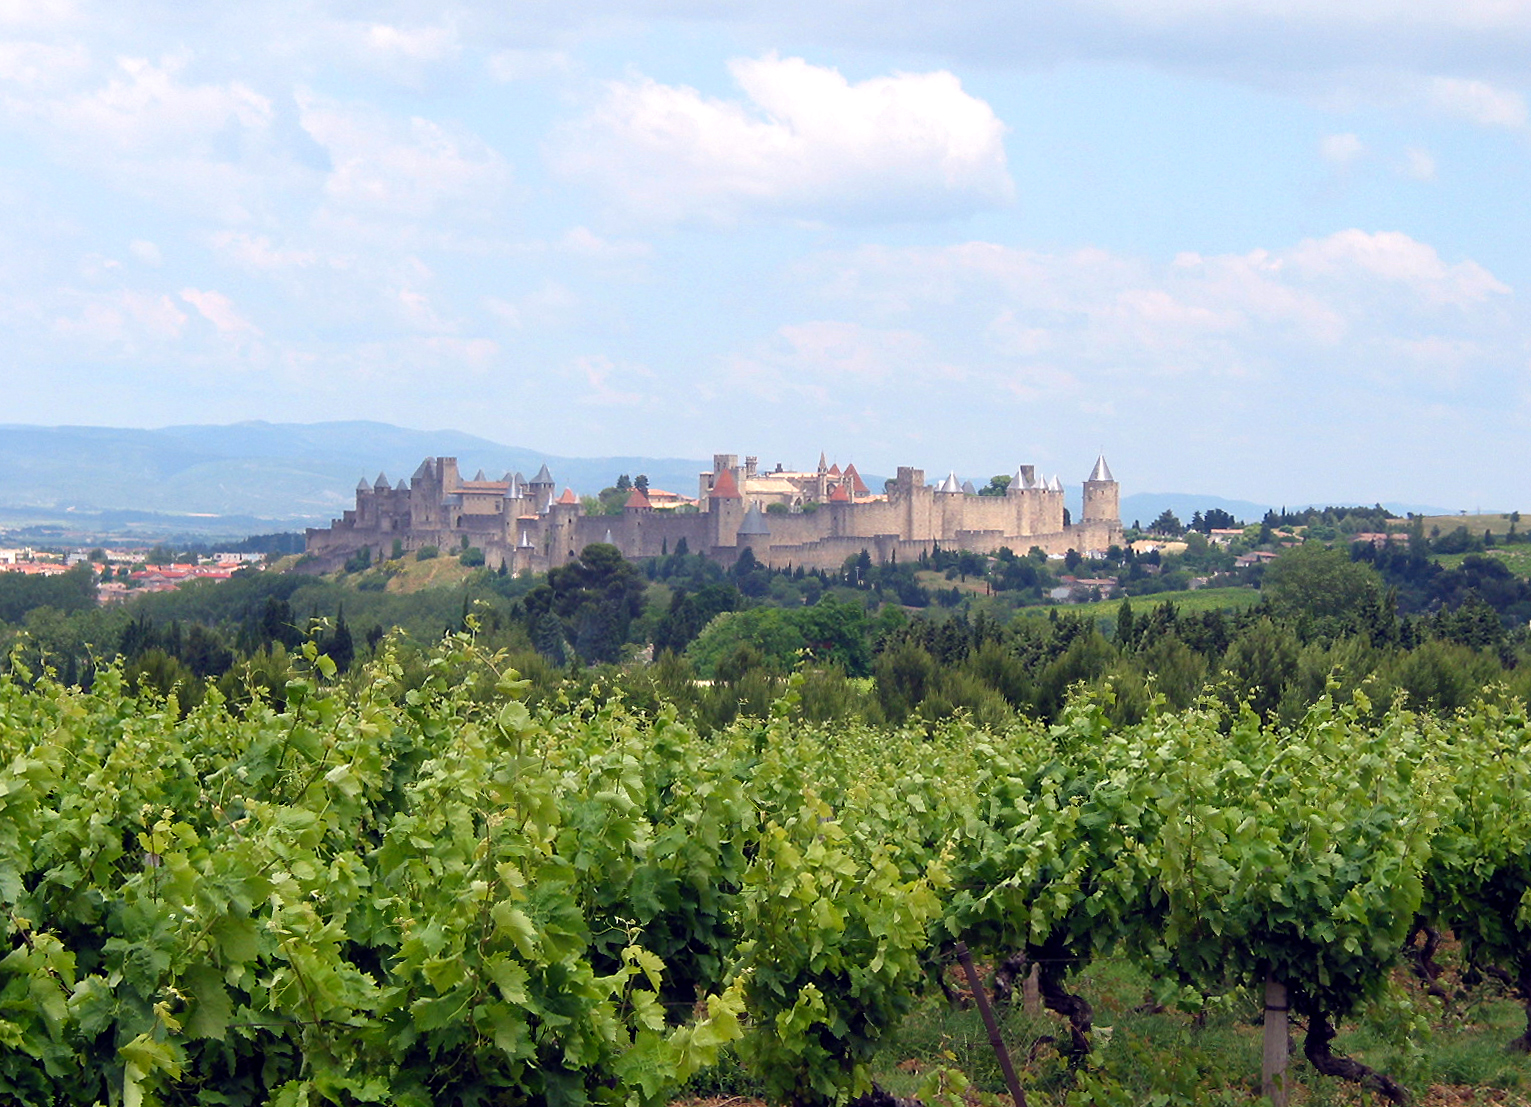 Good people of Languedoc - Carcassonne, pays de cathars